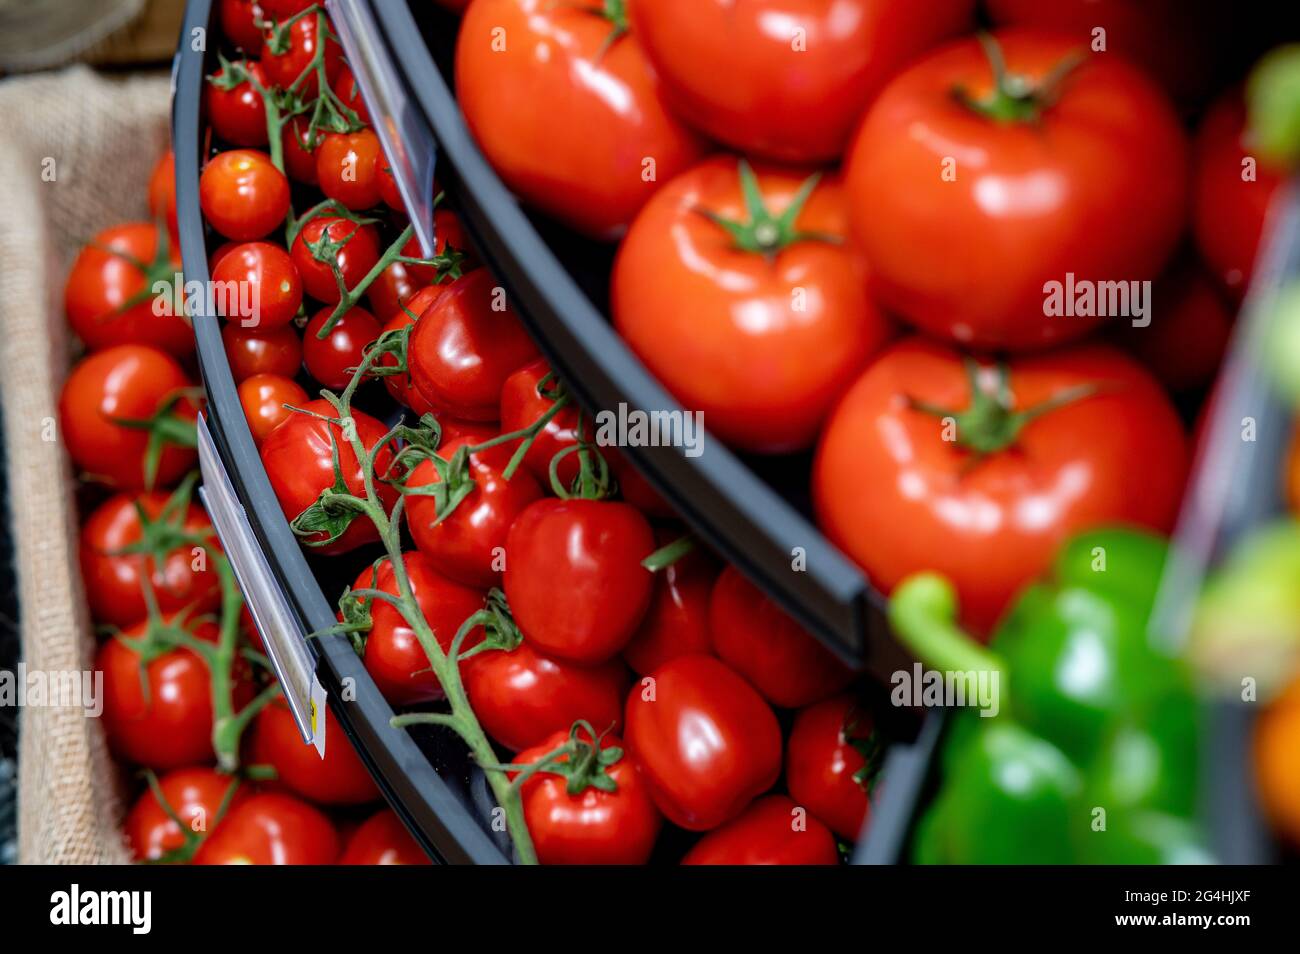 Tomatoes on sale at a supermarket. Stock Photo